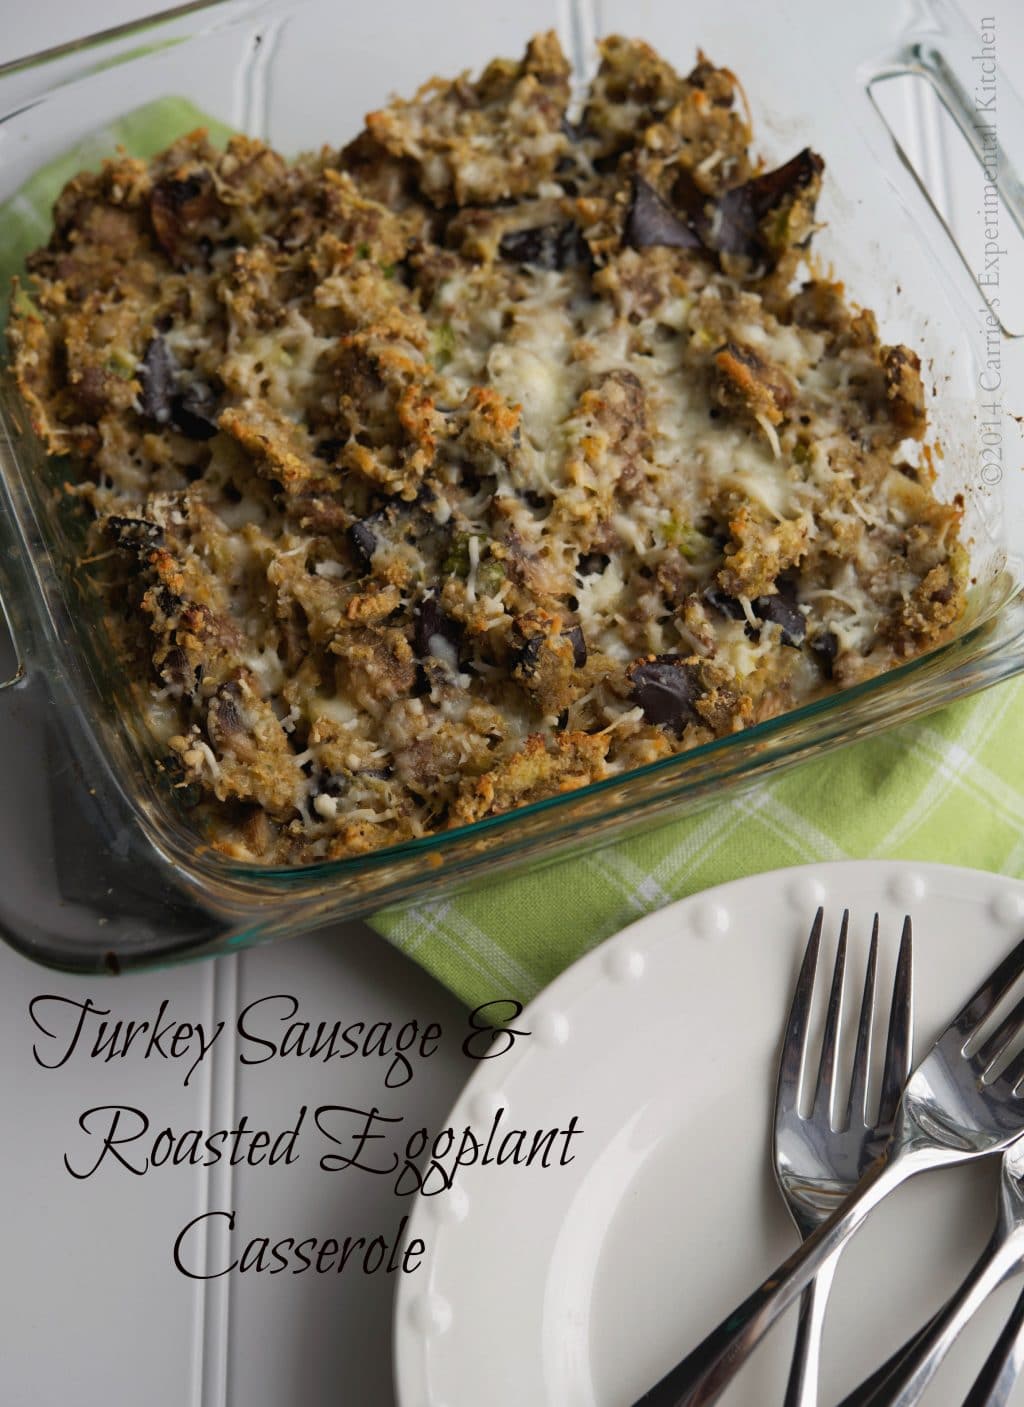 turkey sausage and roasted eggplant casserole #jdcrumbles